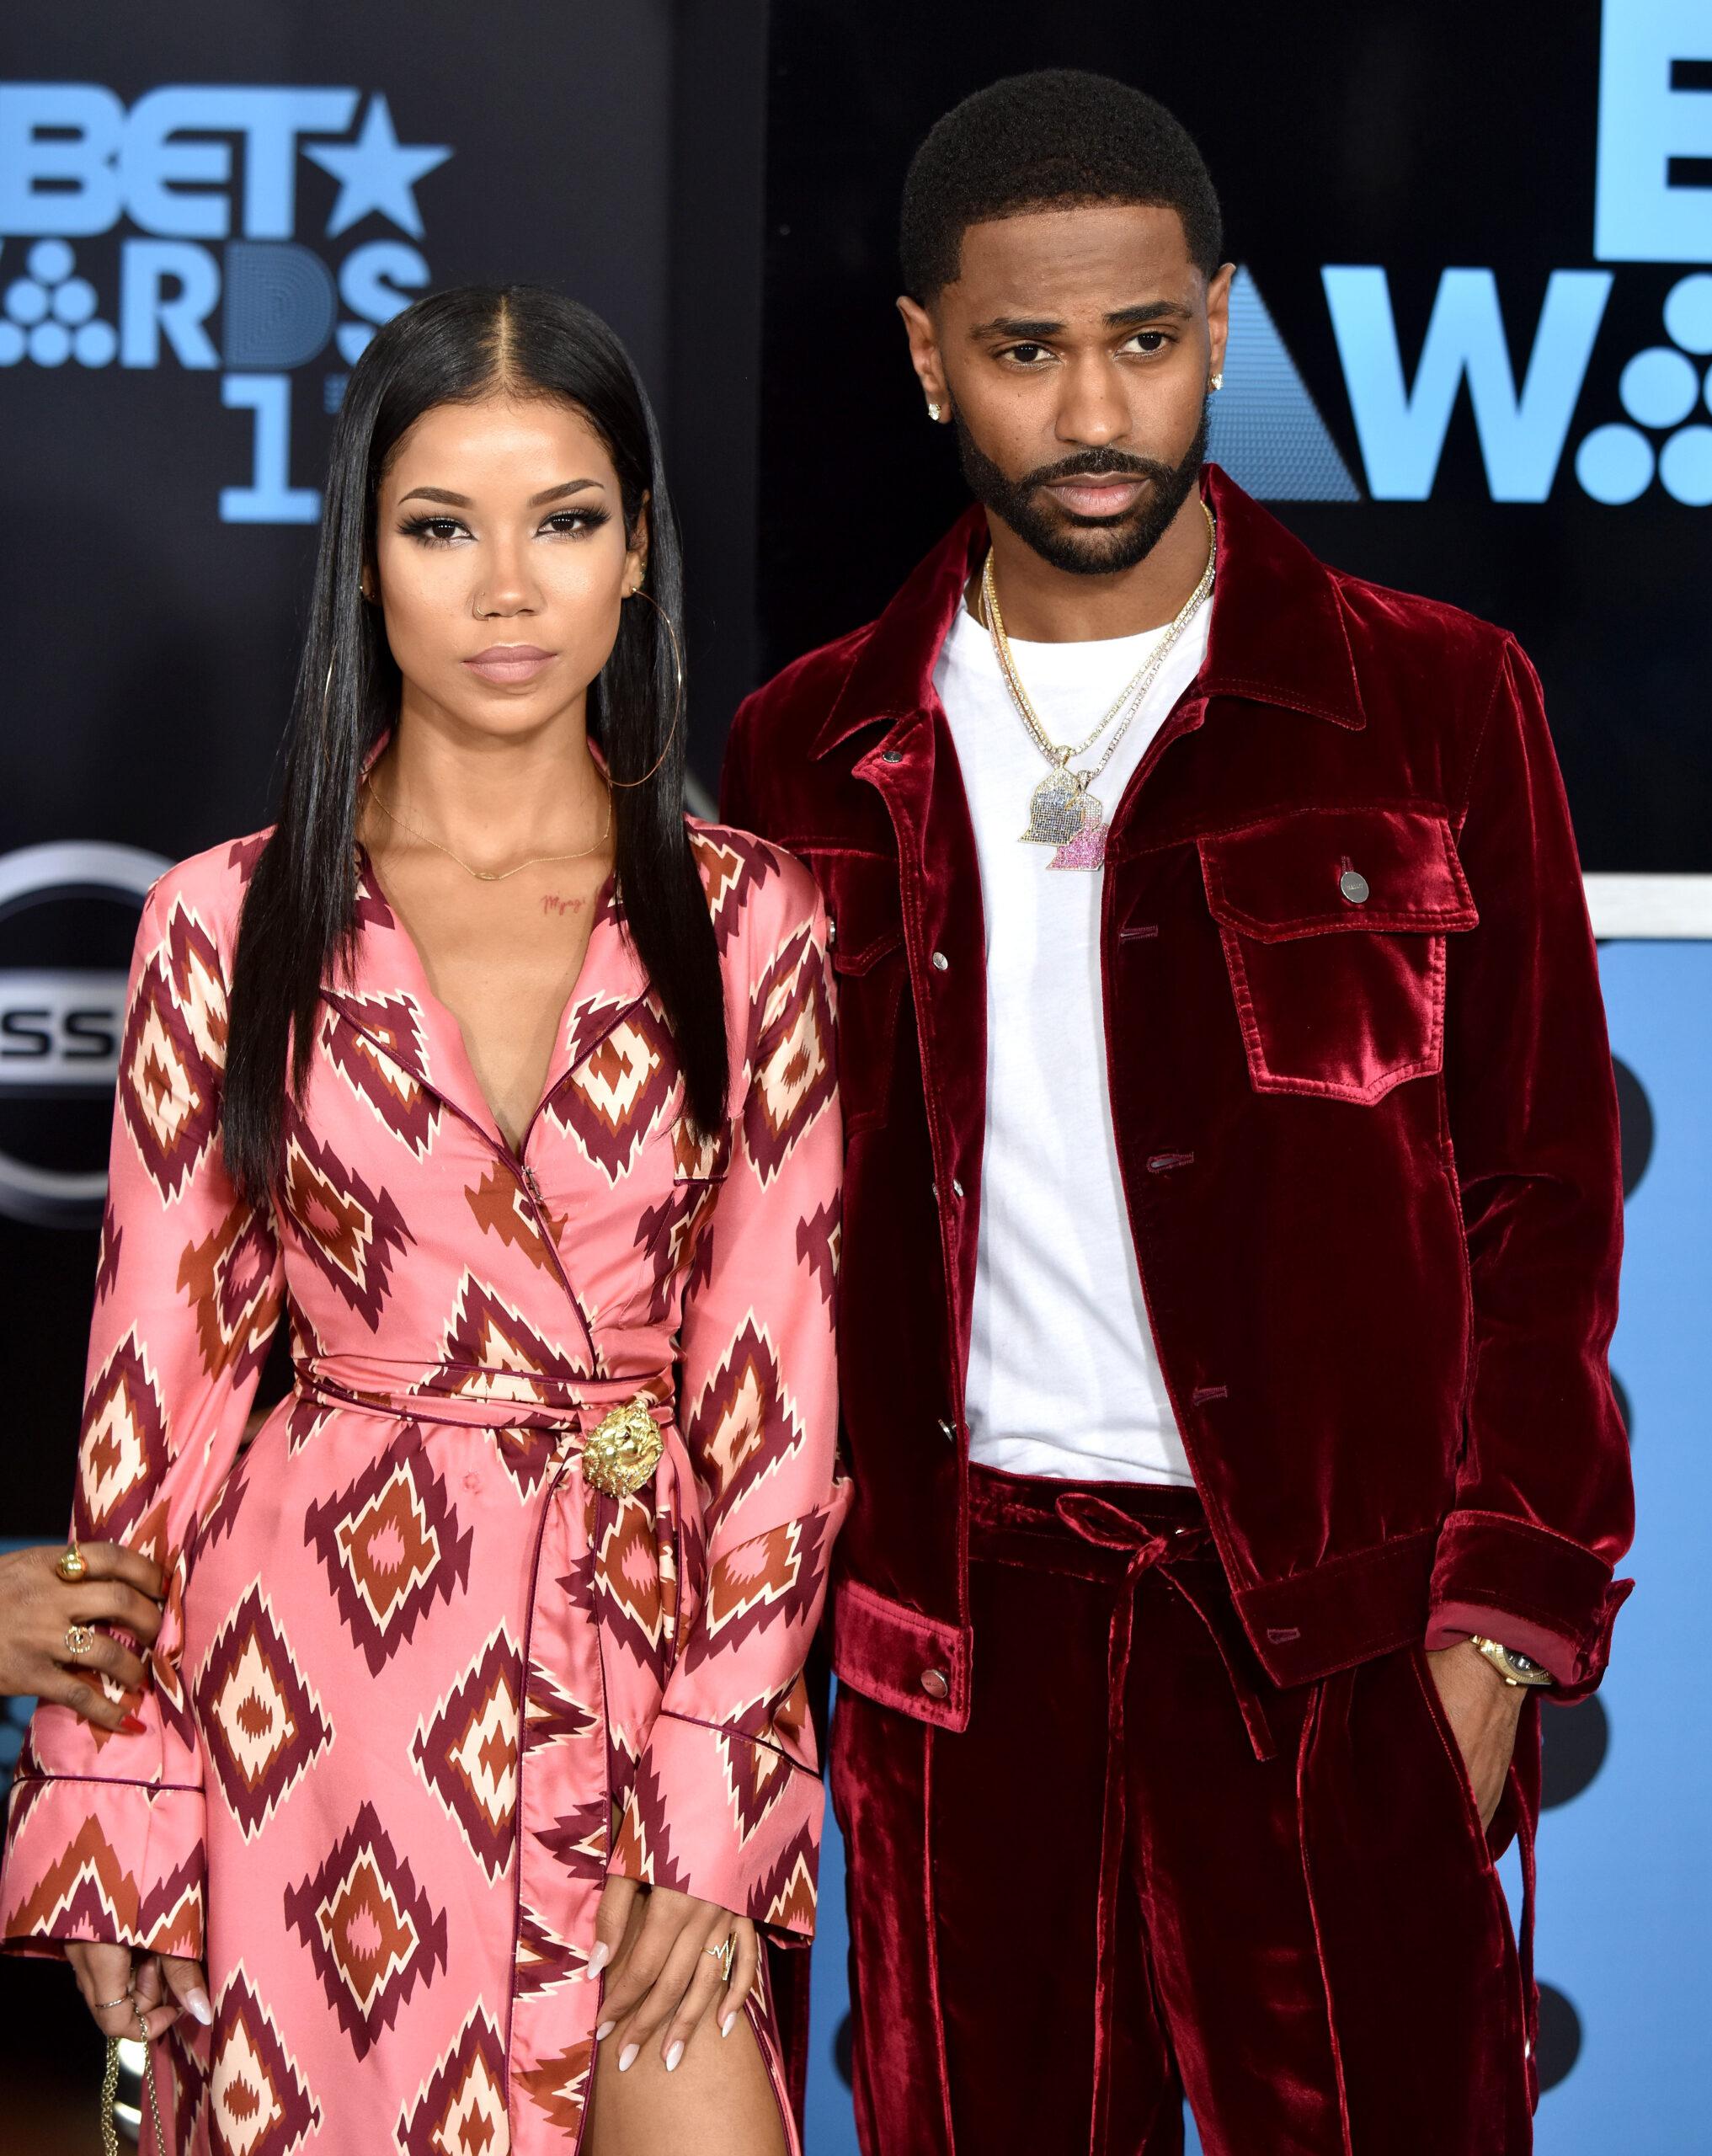 Jhene Aiko and Big Sean attend the annual BET Awards in Los Angeles